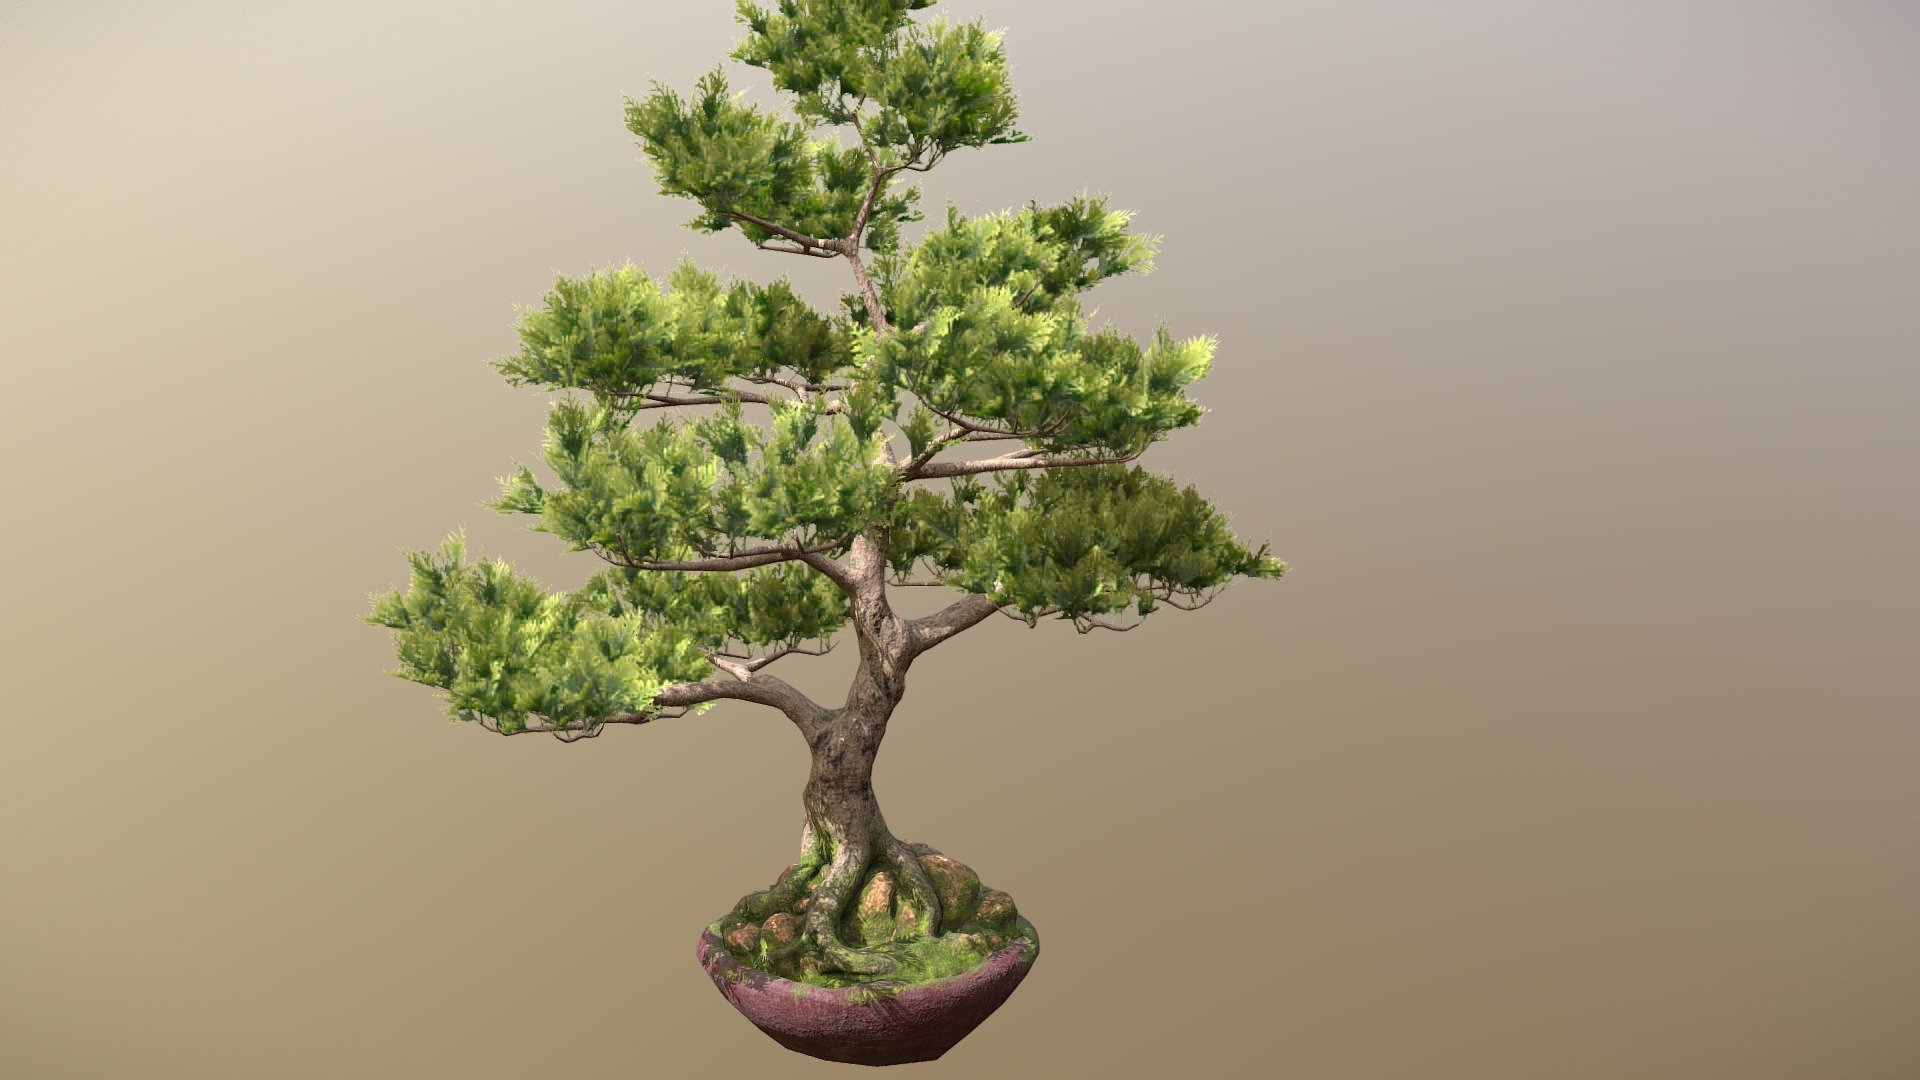 Bonsai tree sculpted in zbrush, textured in substance painter and rendered on blender with eevee realtime engine

PBR textures 4k - Bonsai Tree - Buy Royalty Free 3D model by felipehez 3d model